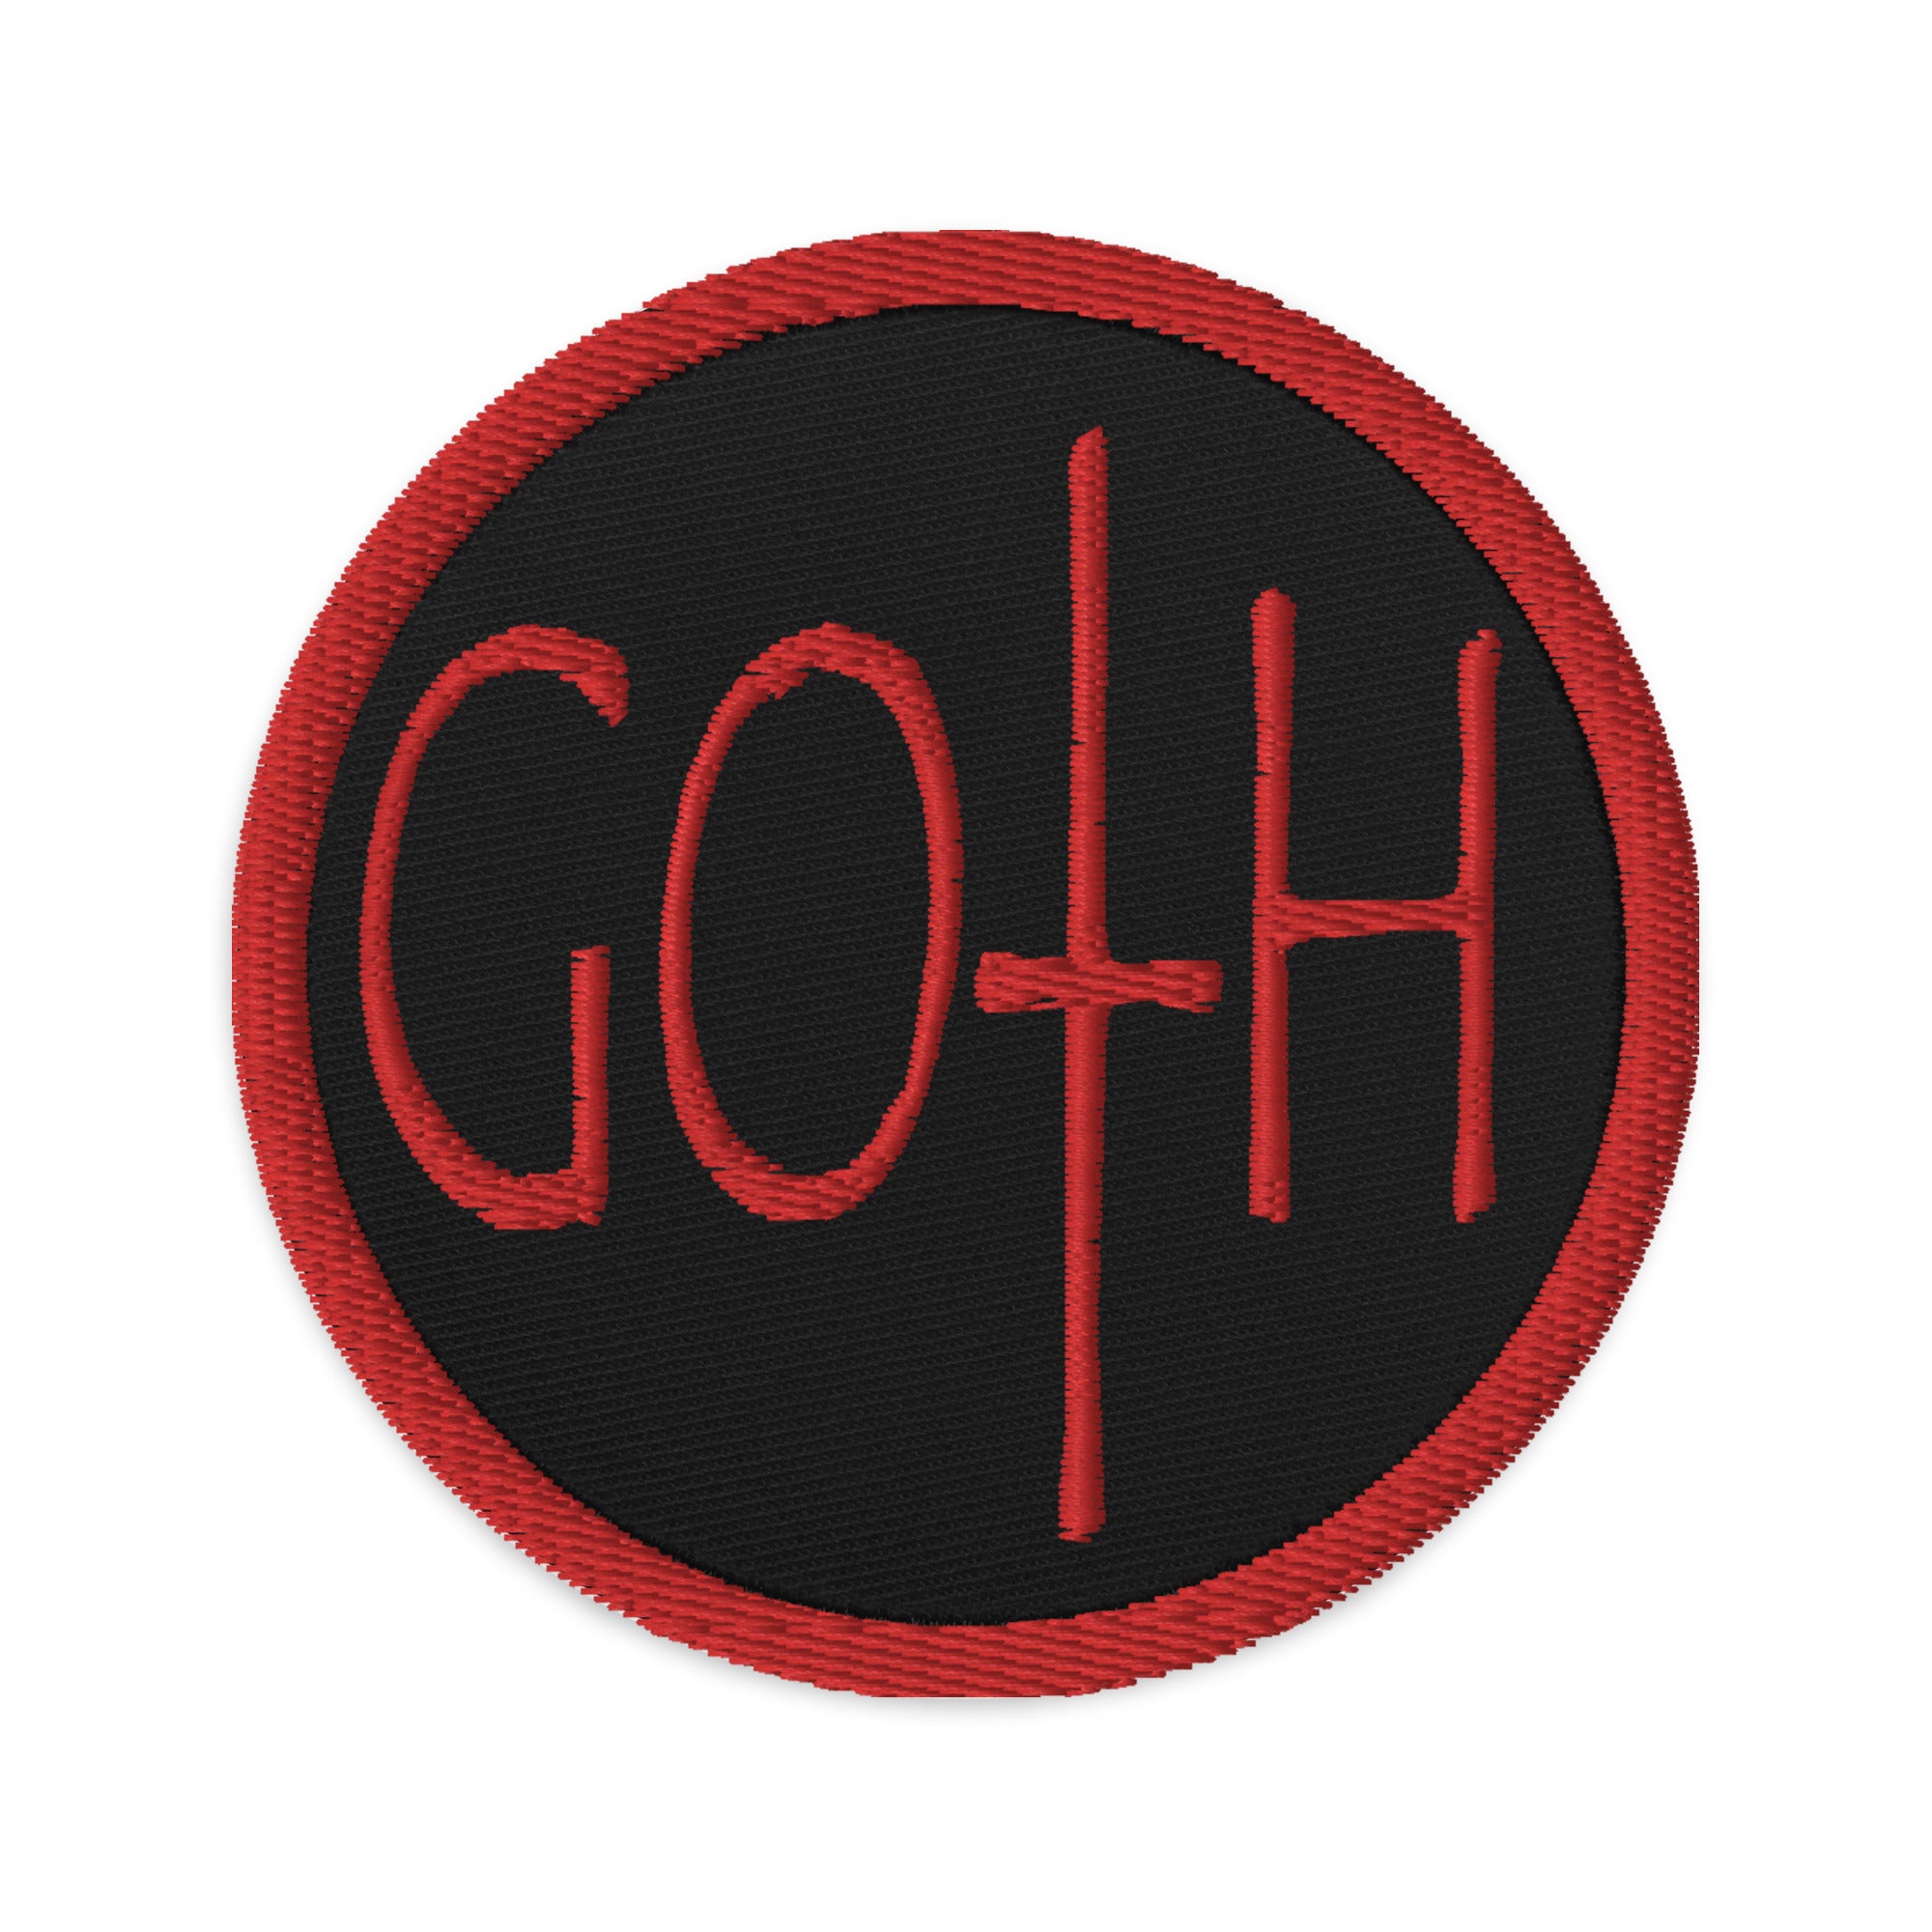 Goth Dark and Morbid Style Halloween Celebration Embroidered Patch Red Thread - Edge of Life Designs